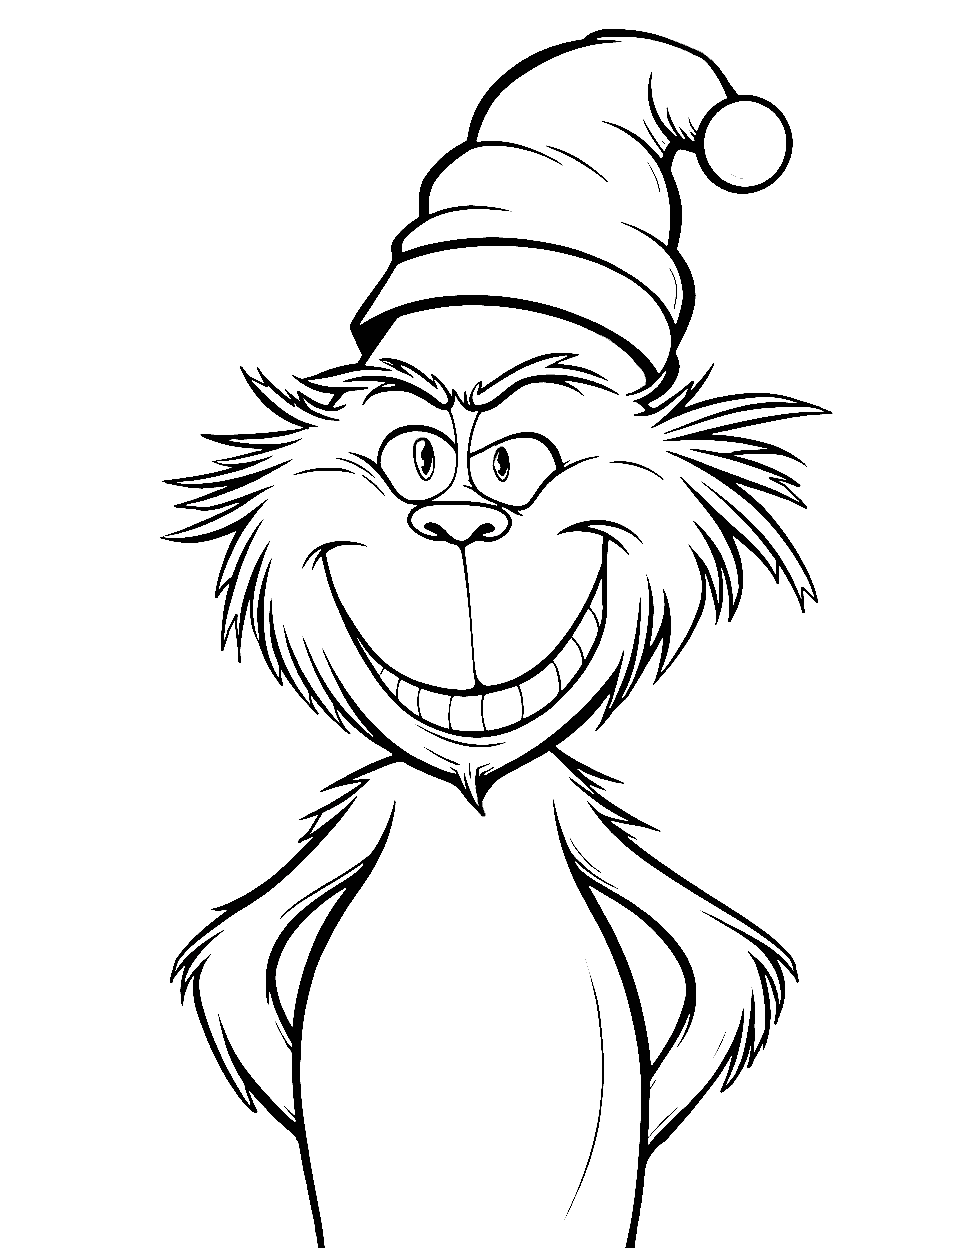 Grinch Head Closeup Coloring Page - A detailed closeup of the Grinch’s head showing his expression.